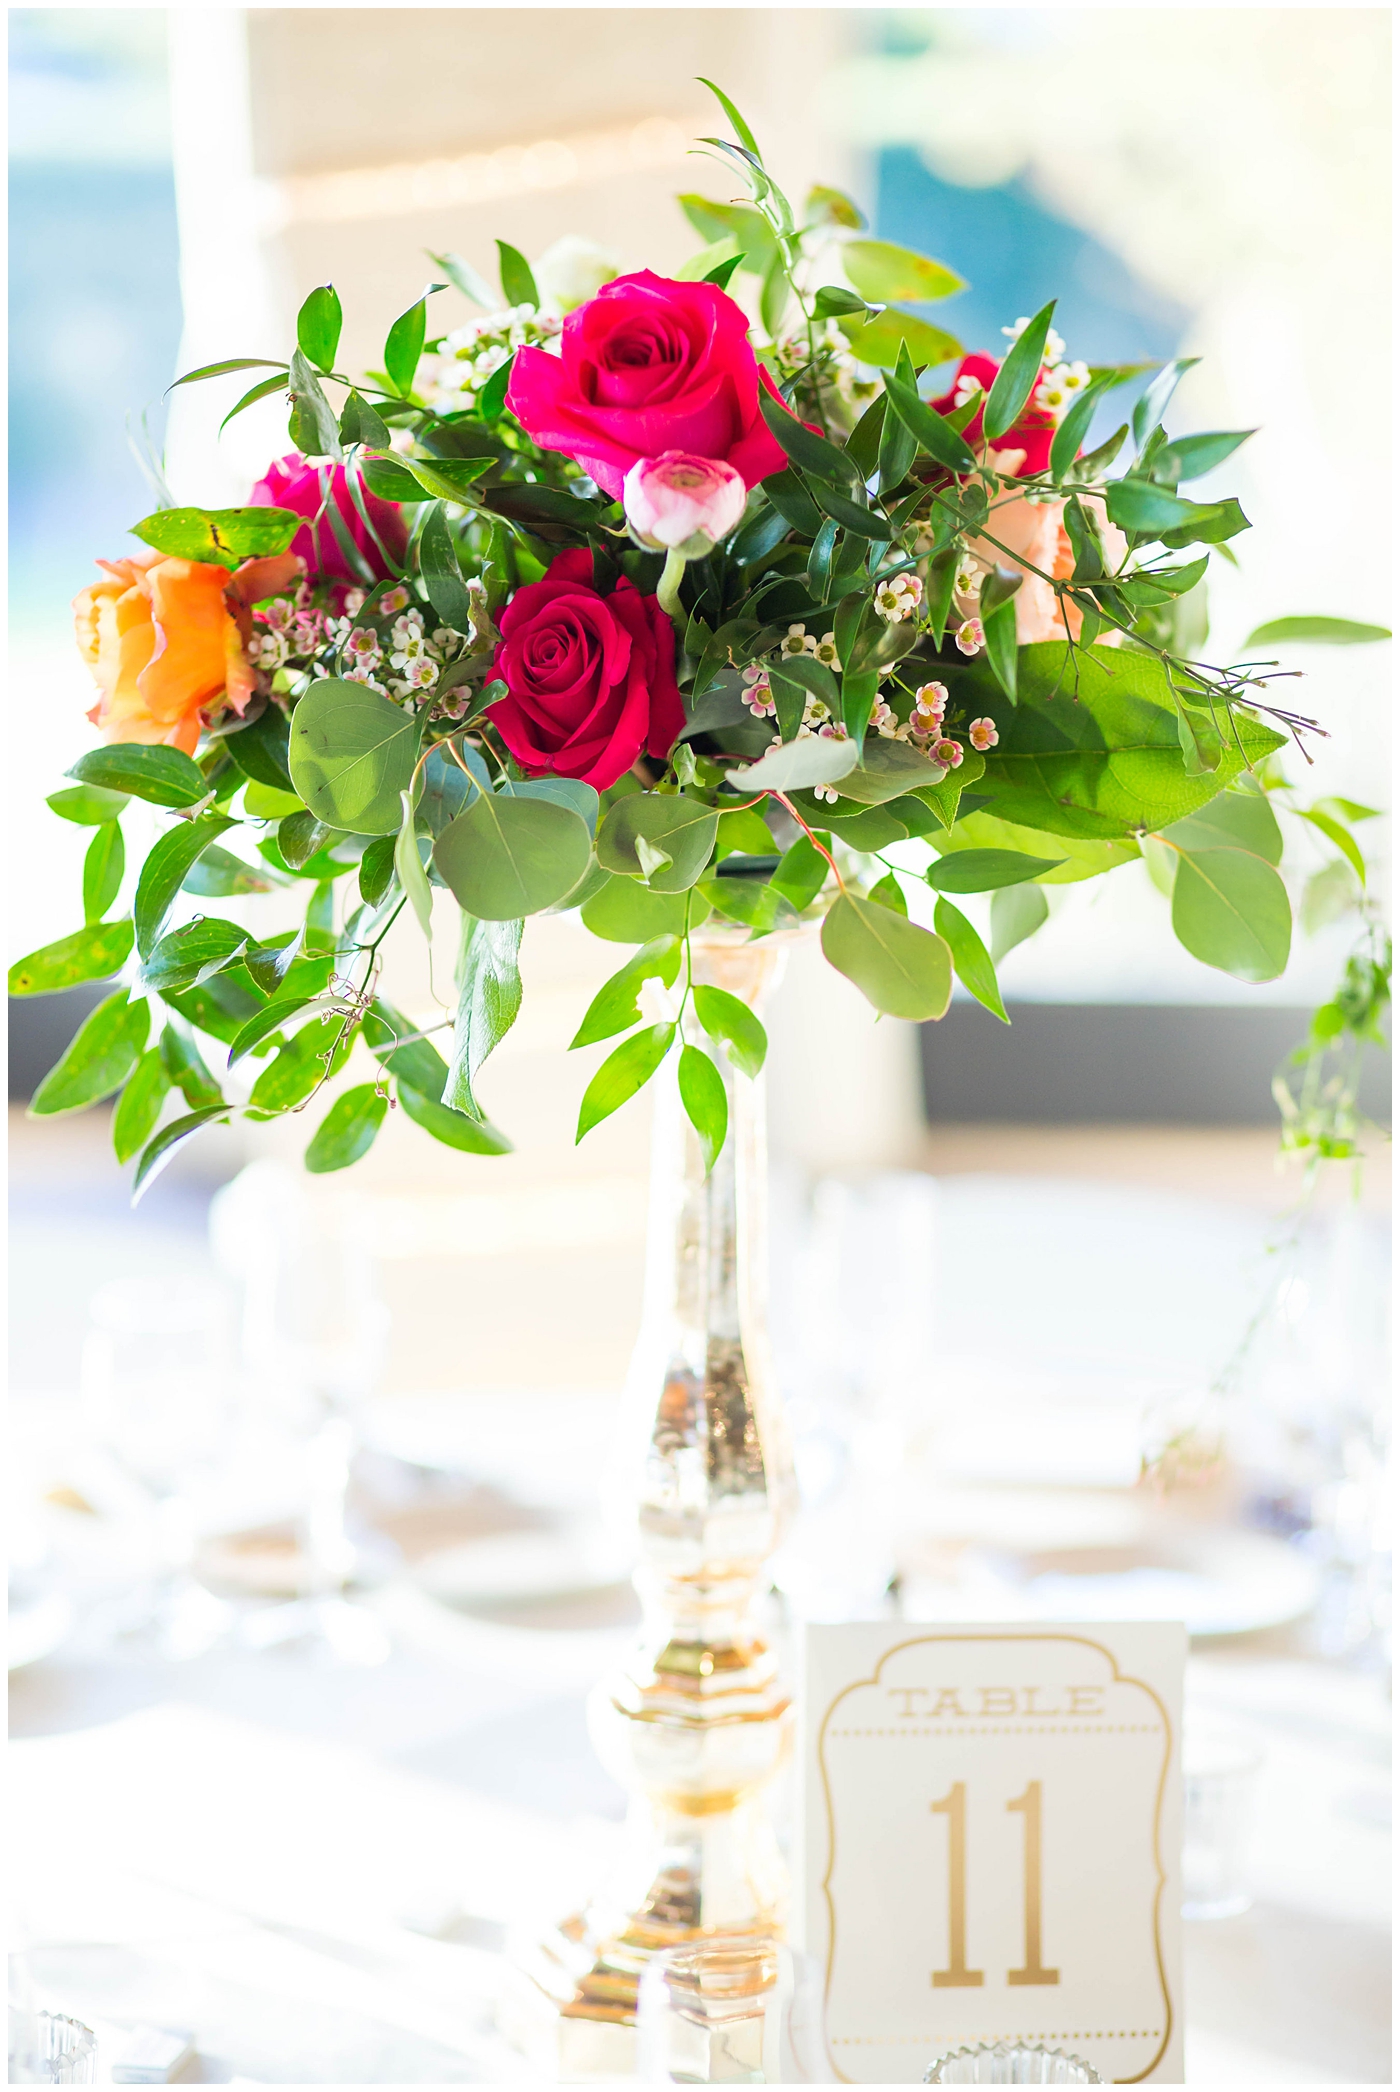 wedding reception details with white tables and chairs with gold stands with white, bright pink, orange, yellow and green flowers